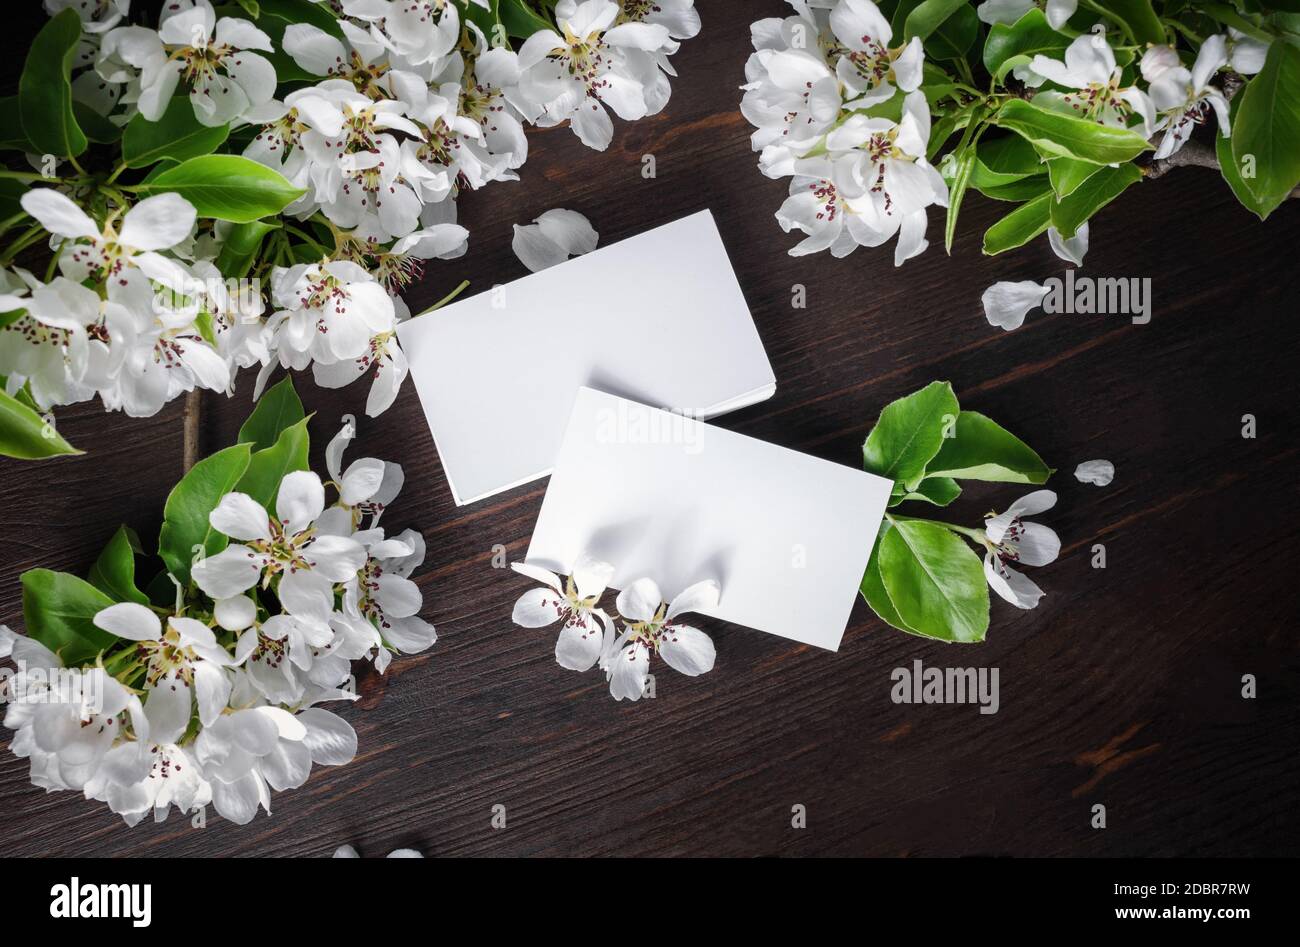 Blank business cards and flowers on wooden background. High size mockup. Flat lay. Stock Photo